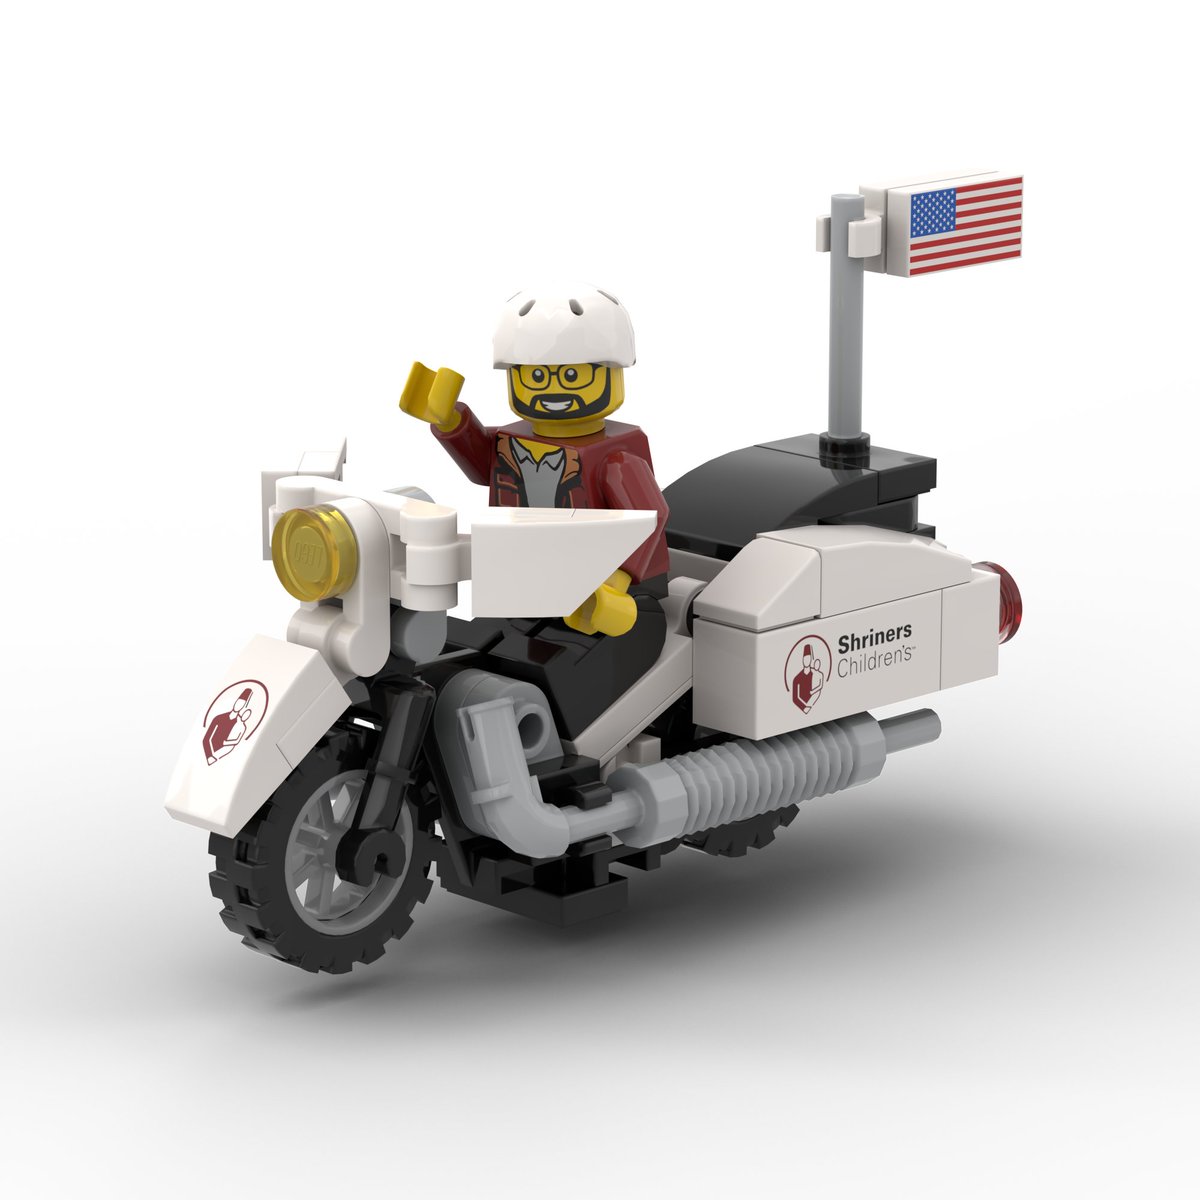 The race is on to get your mini #LEGO parade vehicles! Brixilated created a built kit featuring a semi, Indy car, and motorcycle! You get all three for $100 and all profits are donated! This is a limited-edition so order now: brixilated.com/product/shrine…